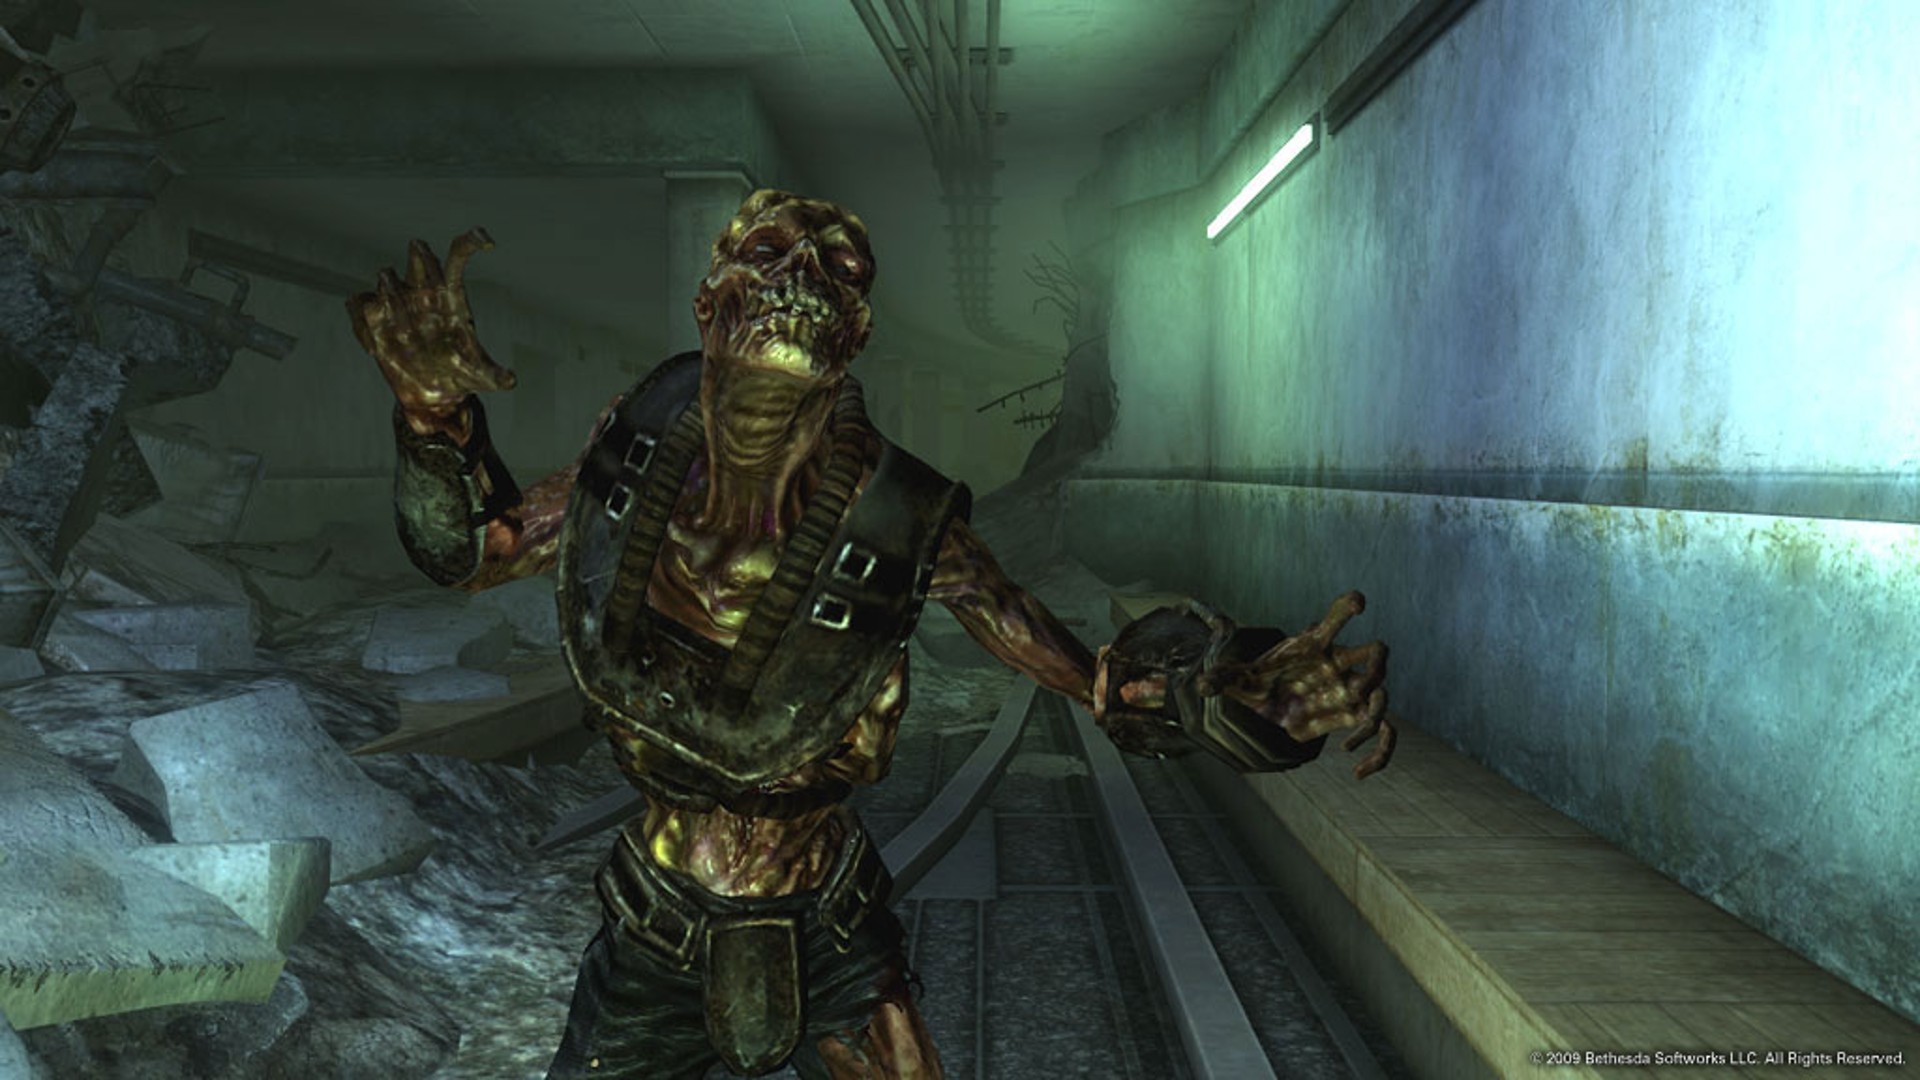 Fallout 3 will be a free game on Epic next week